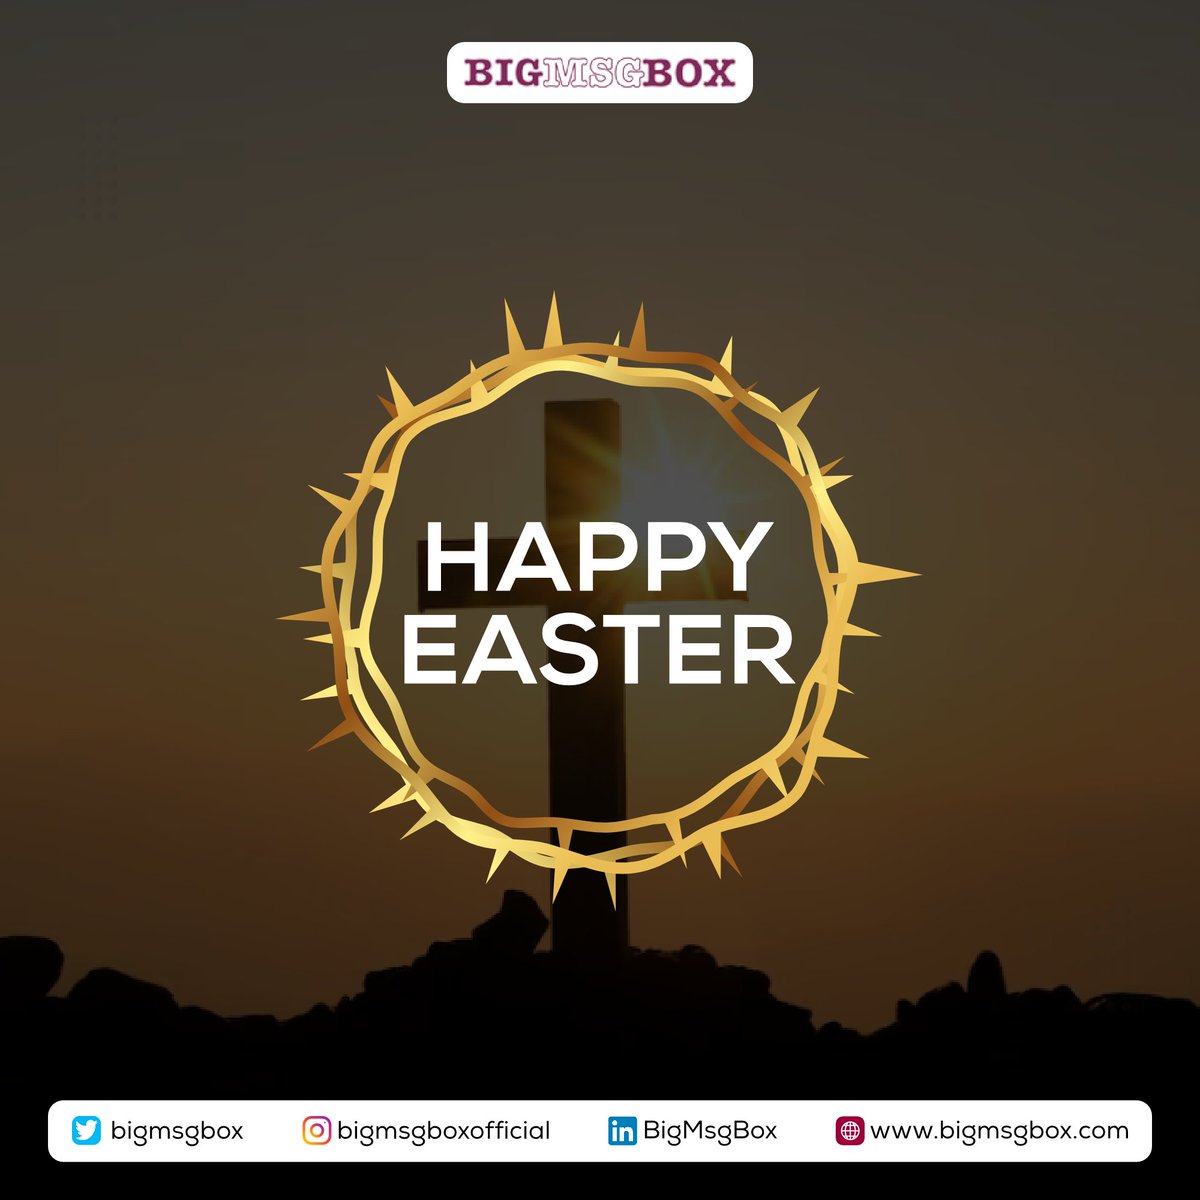 He is risen! Wishing all our customers a Happy Easter!
~ The BigMsgBox Team

#BigMsgBox #Easter2024 #CreatingConnections #CustomerEngagement #BulkSMS #CustomerExperience #CustomerAcquisition #CustomerRetention #LeadGeneration